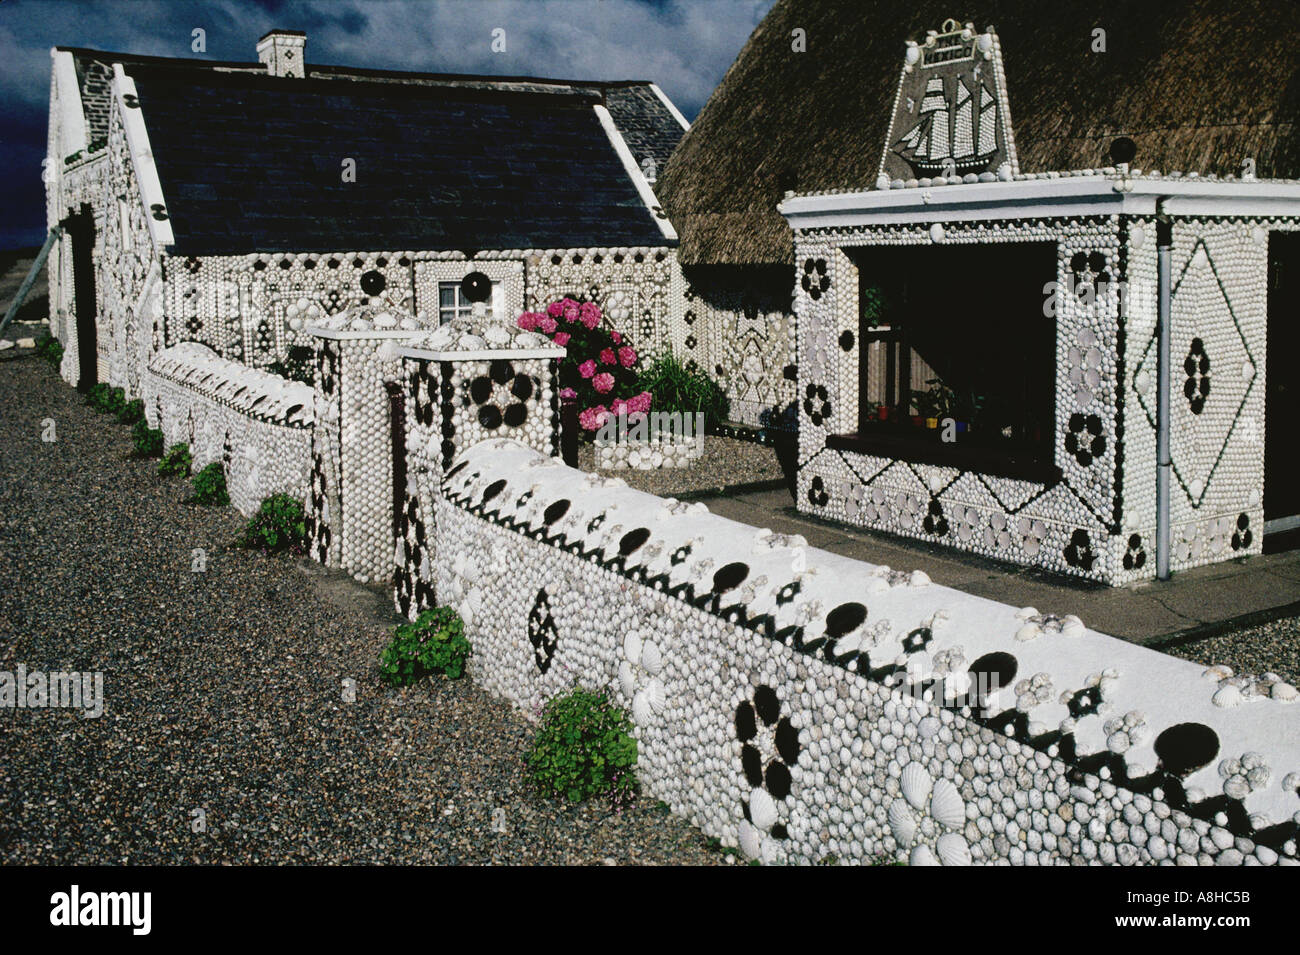 The late Kevin French created this  highly decorated house  with Sea Shells  Cullenstown  Co Wexford  Ireland Stock Photo